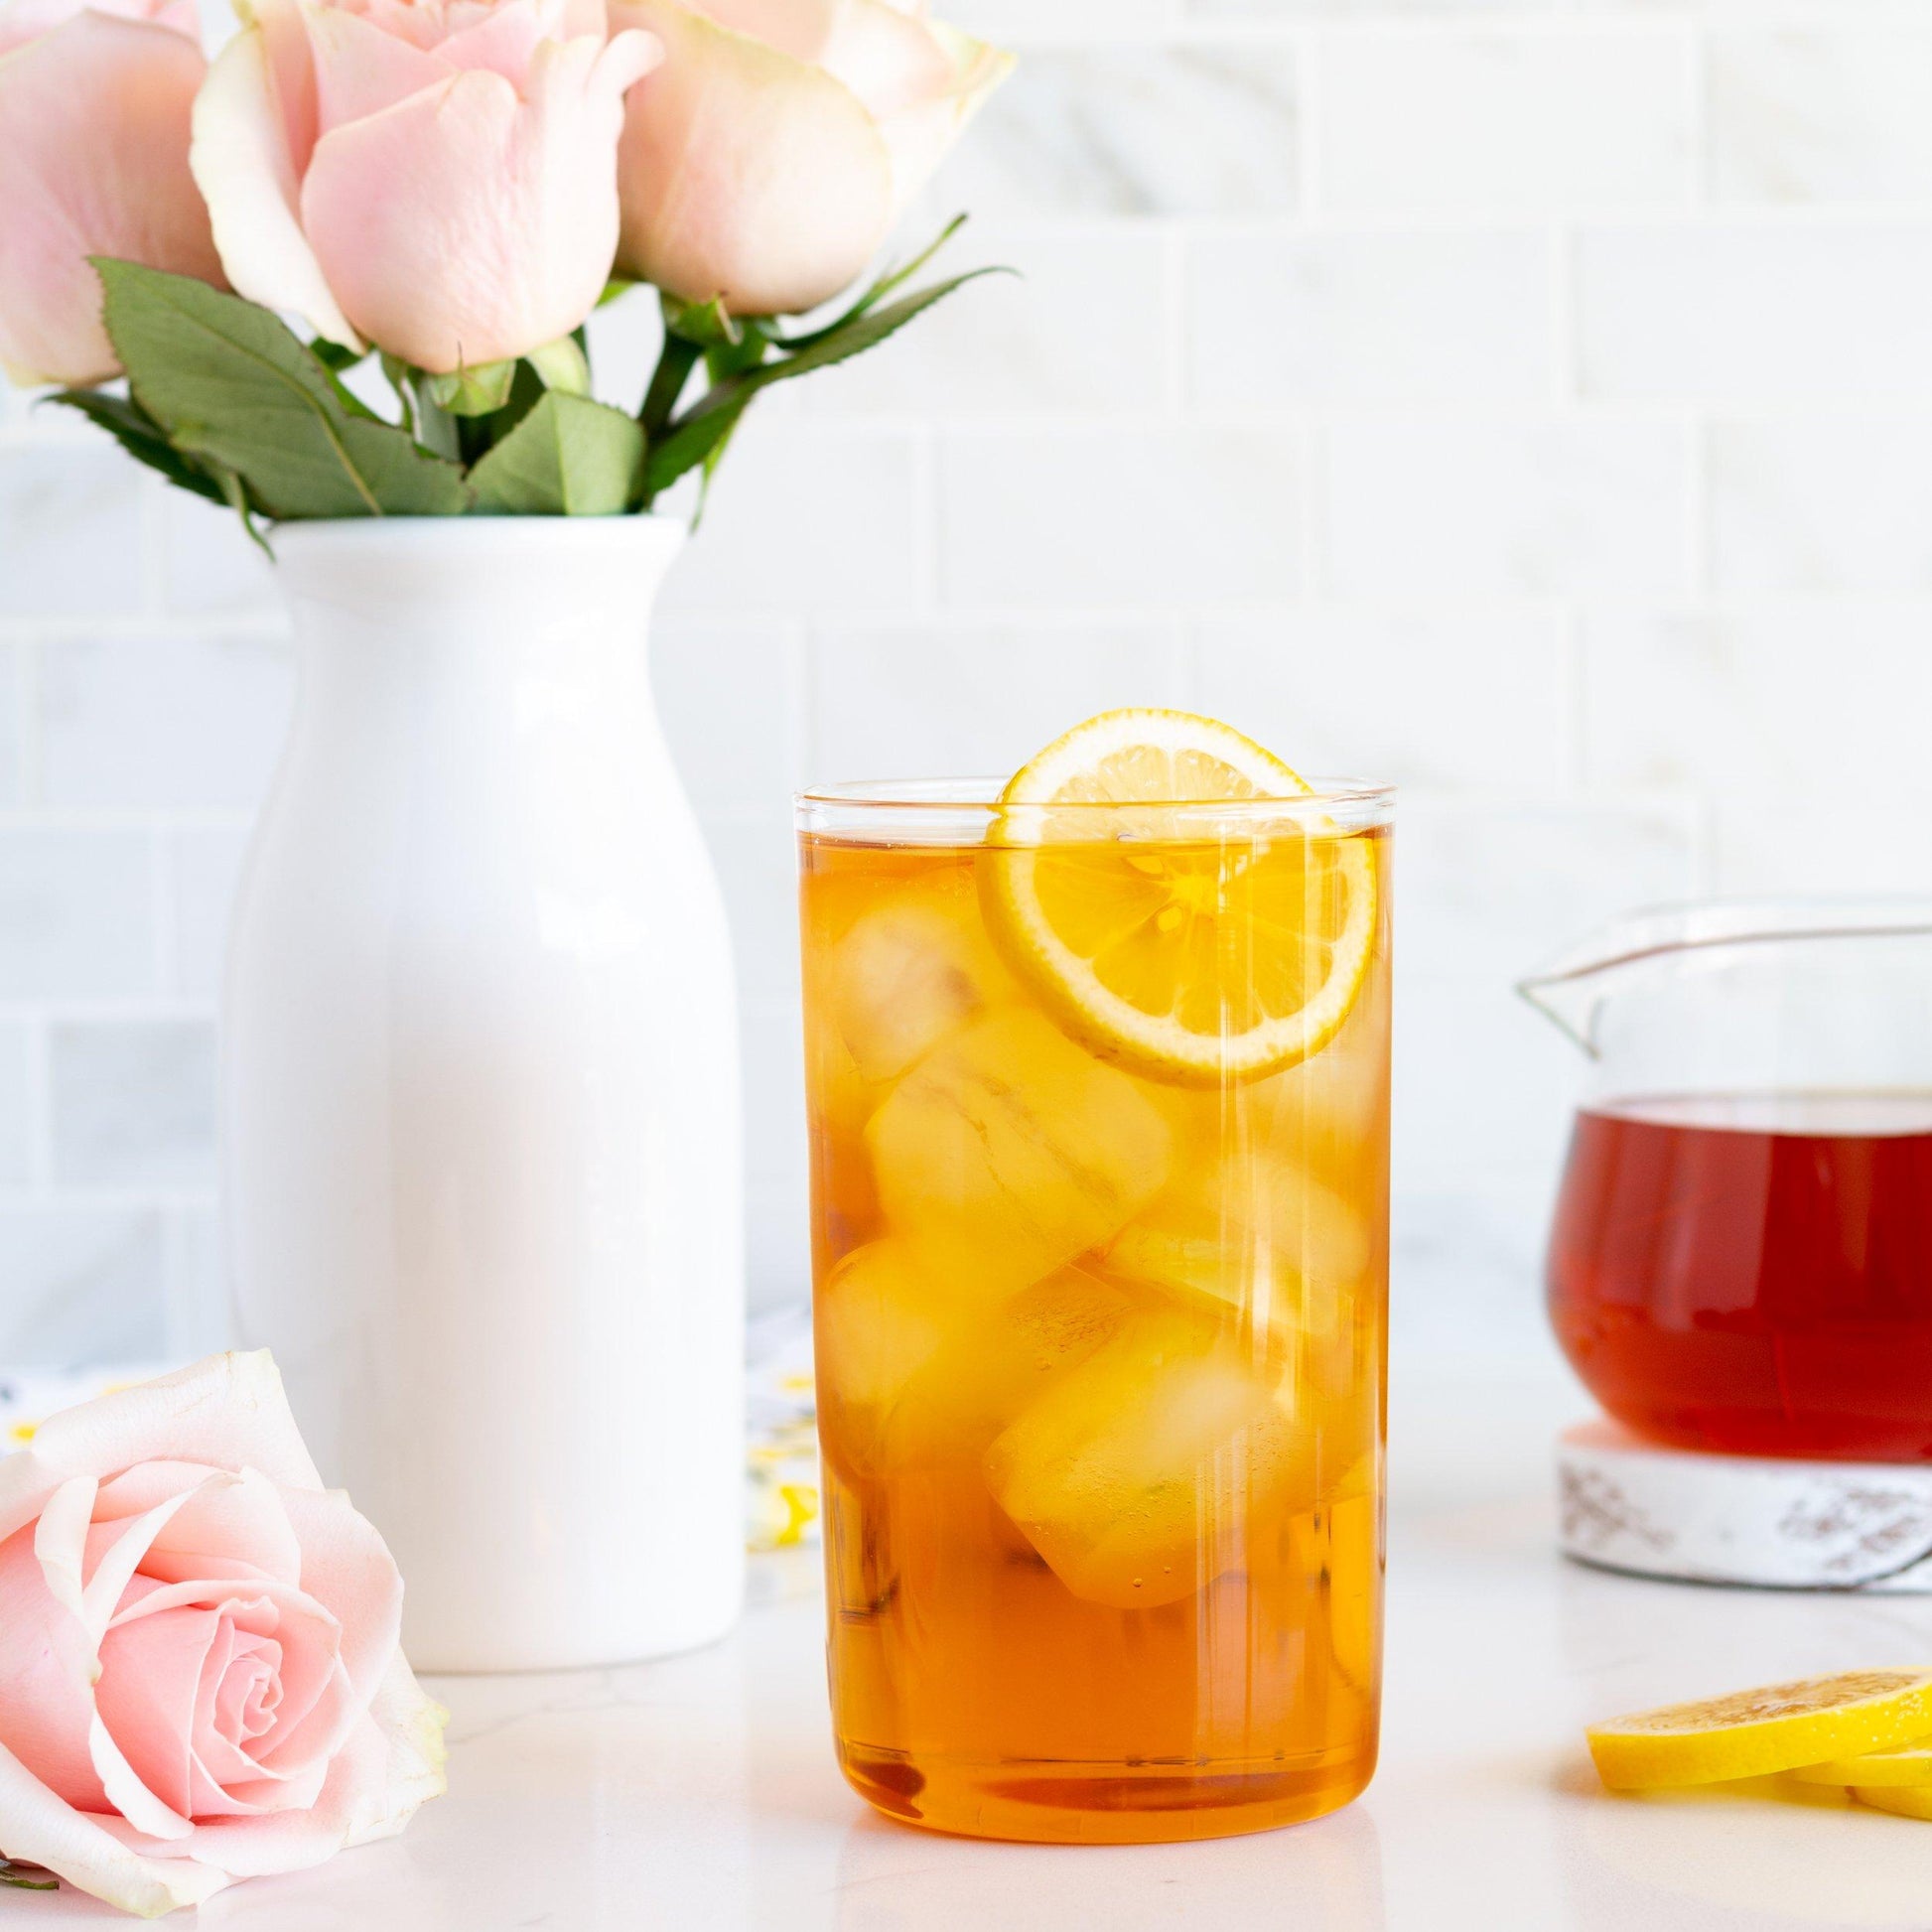 Midnight Rose Organic Black Tea shown as iced tea with a slice of lemon in a glass. Nearby is a white vase of pale pink roses, with a glass teapot of brewed tea in the background